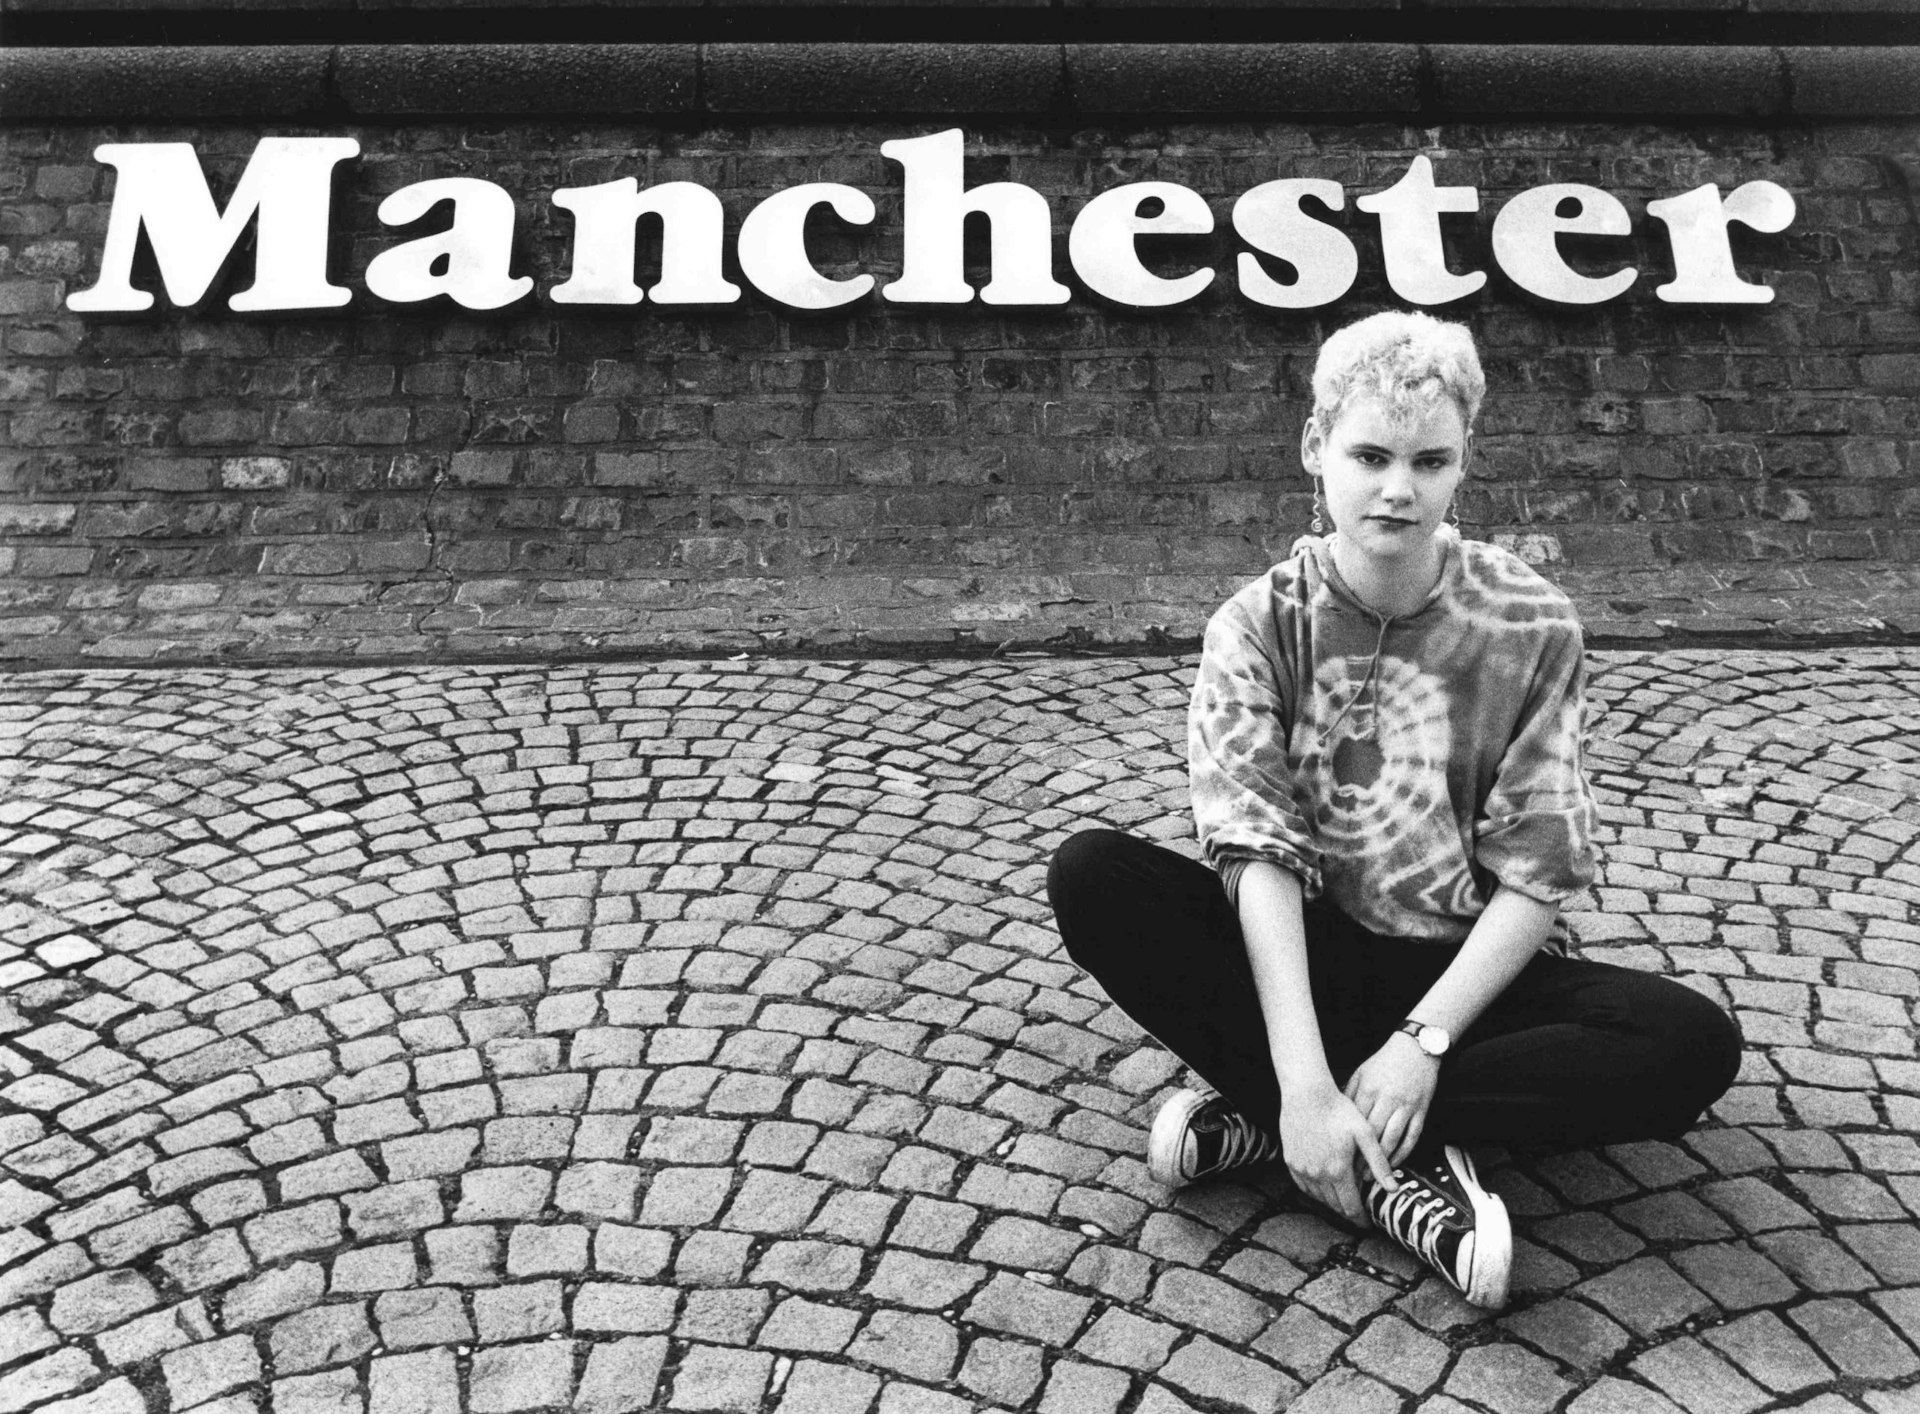 Gritty photos celebrating the Madchester years